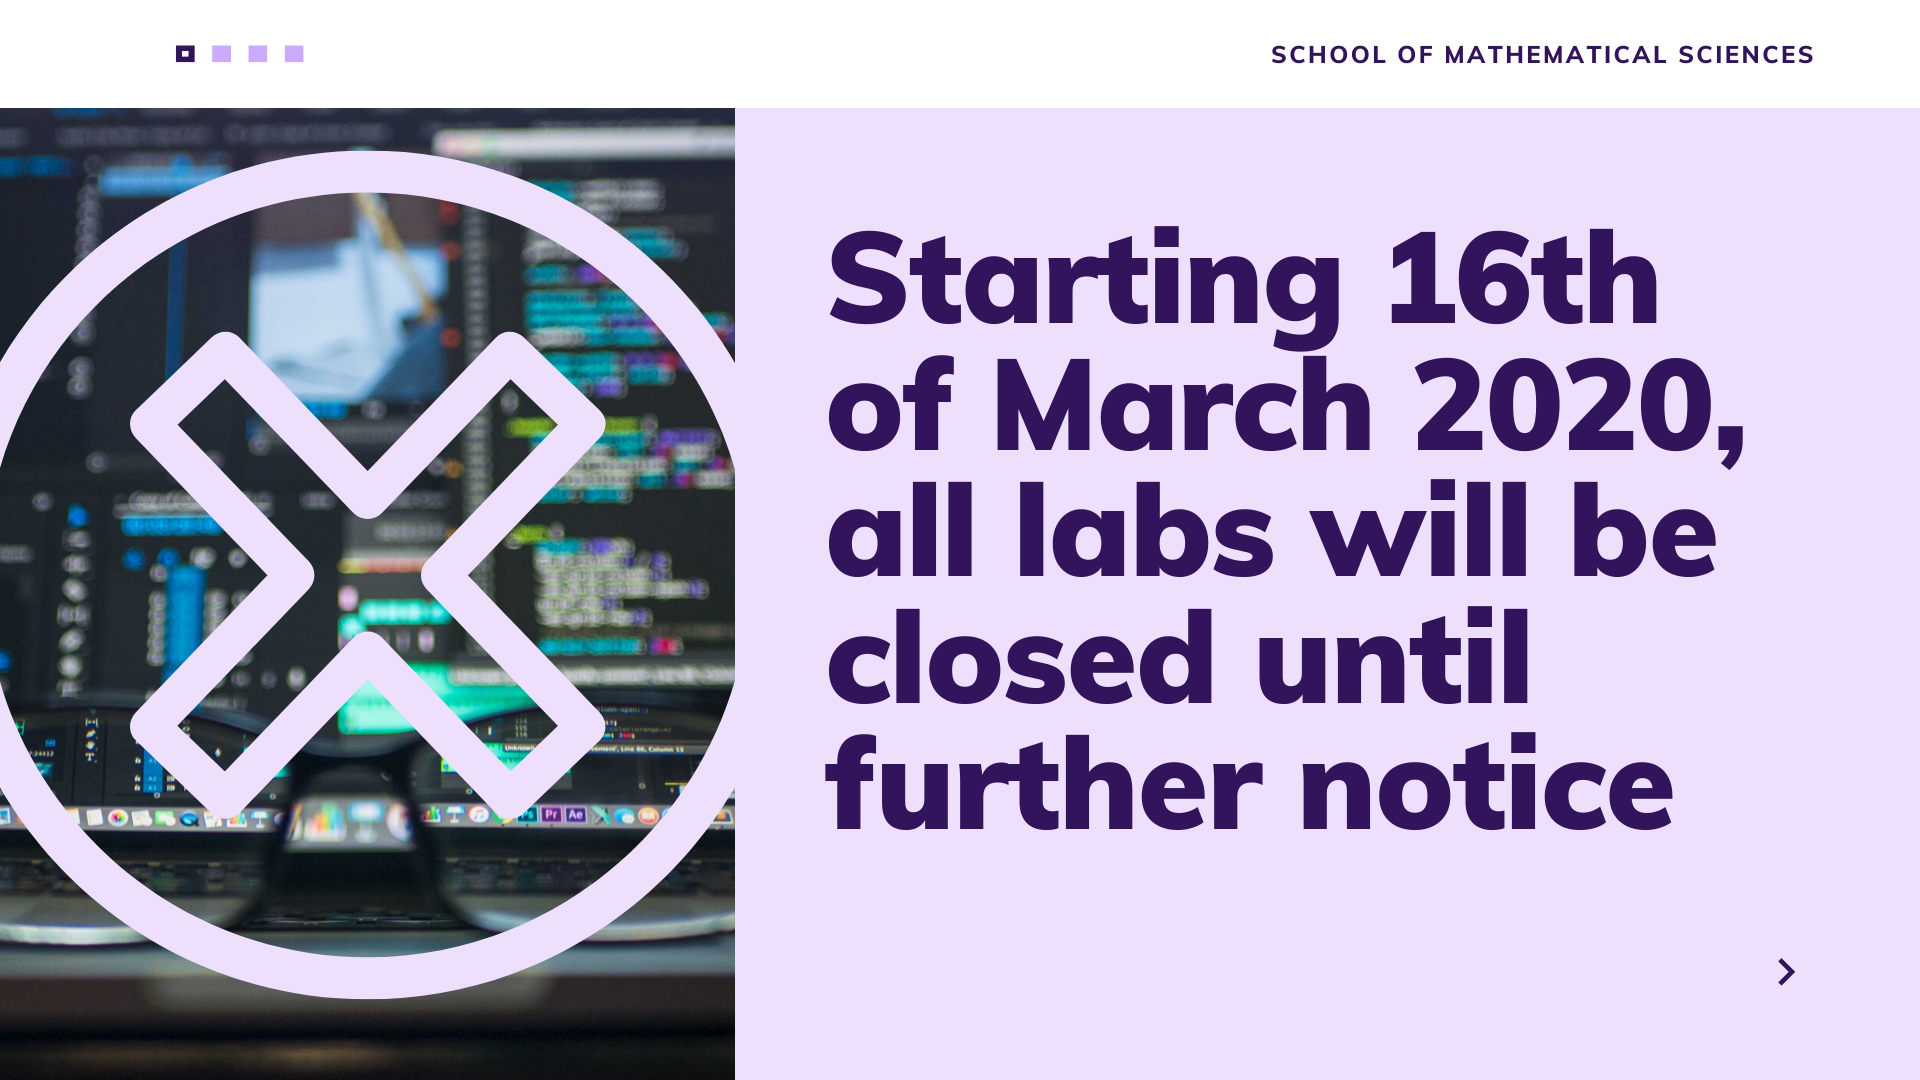 Starting 16th of March 2020 all labs will be closed until further notice